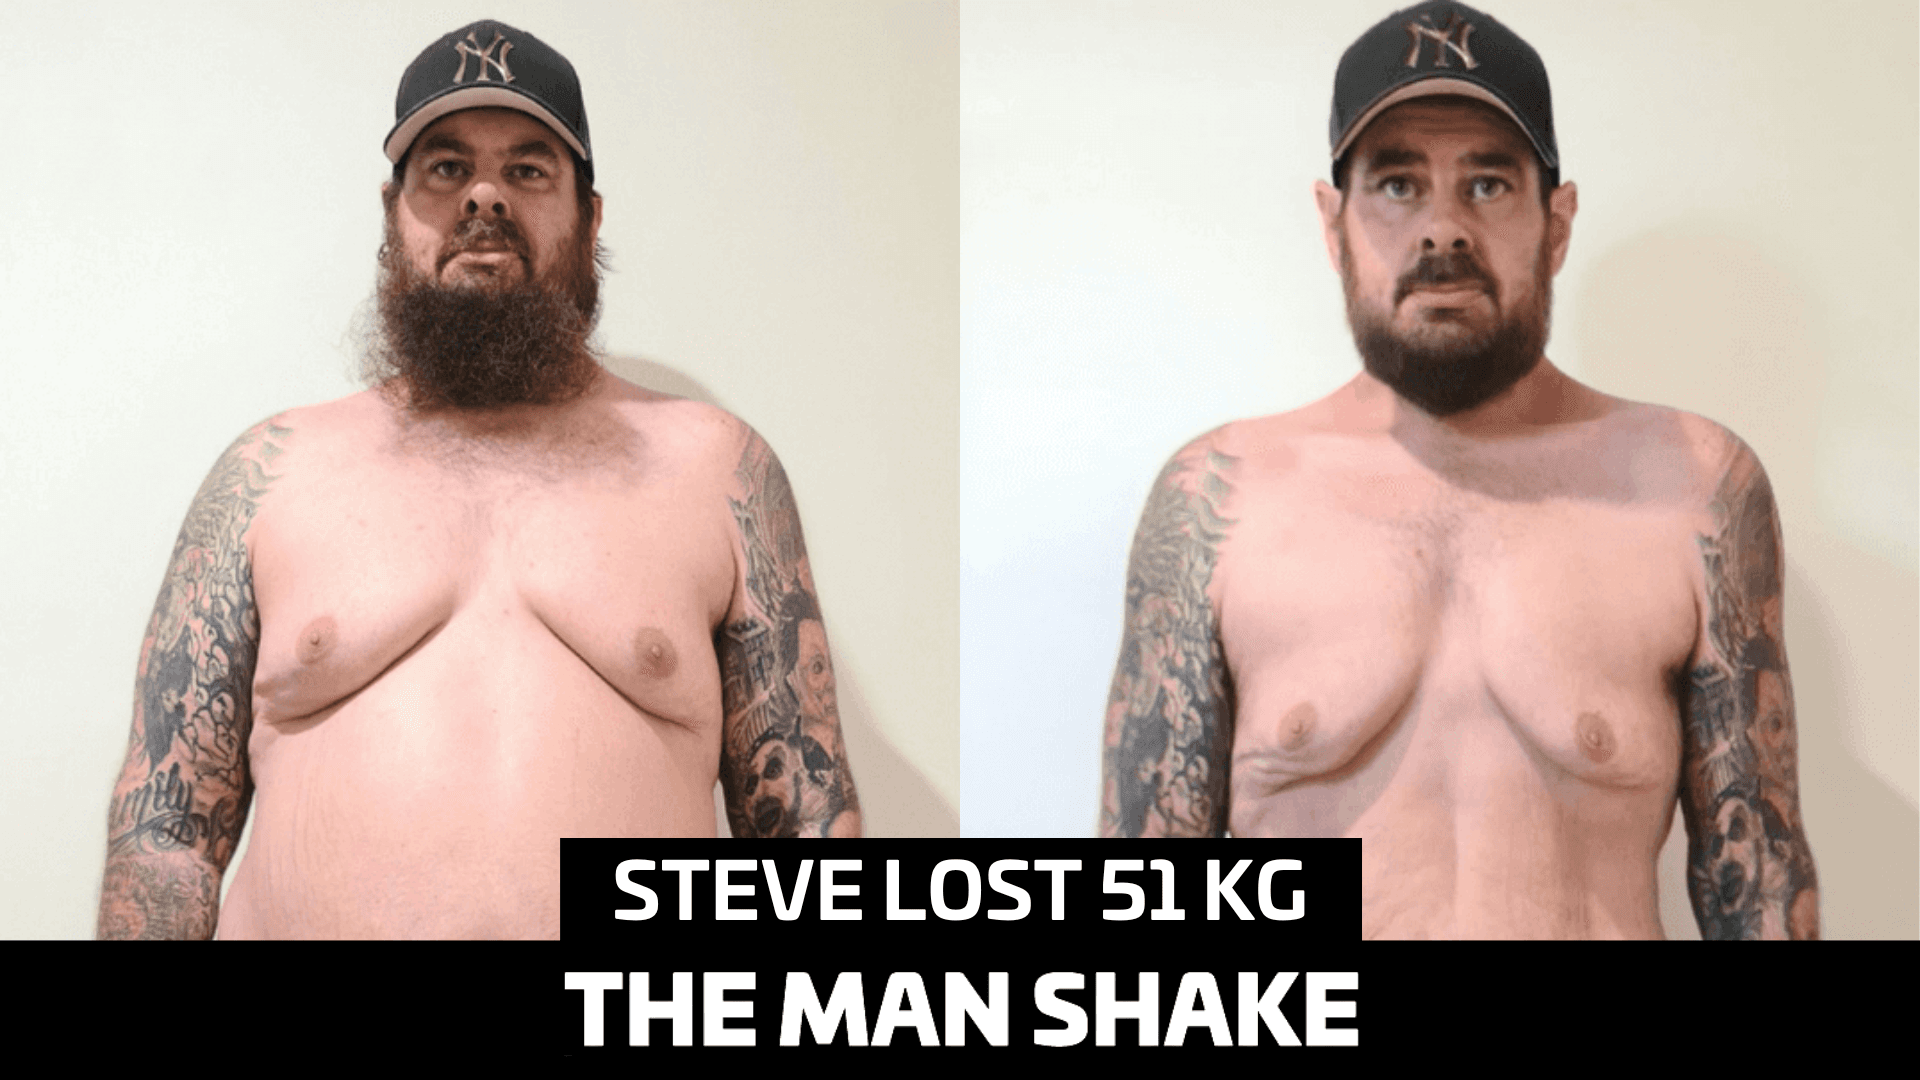 Steve said enough is enough and lost 51kg!